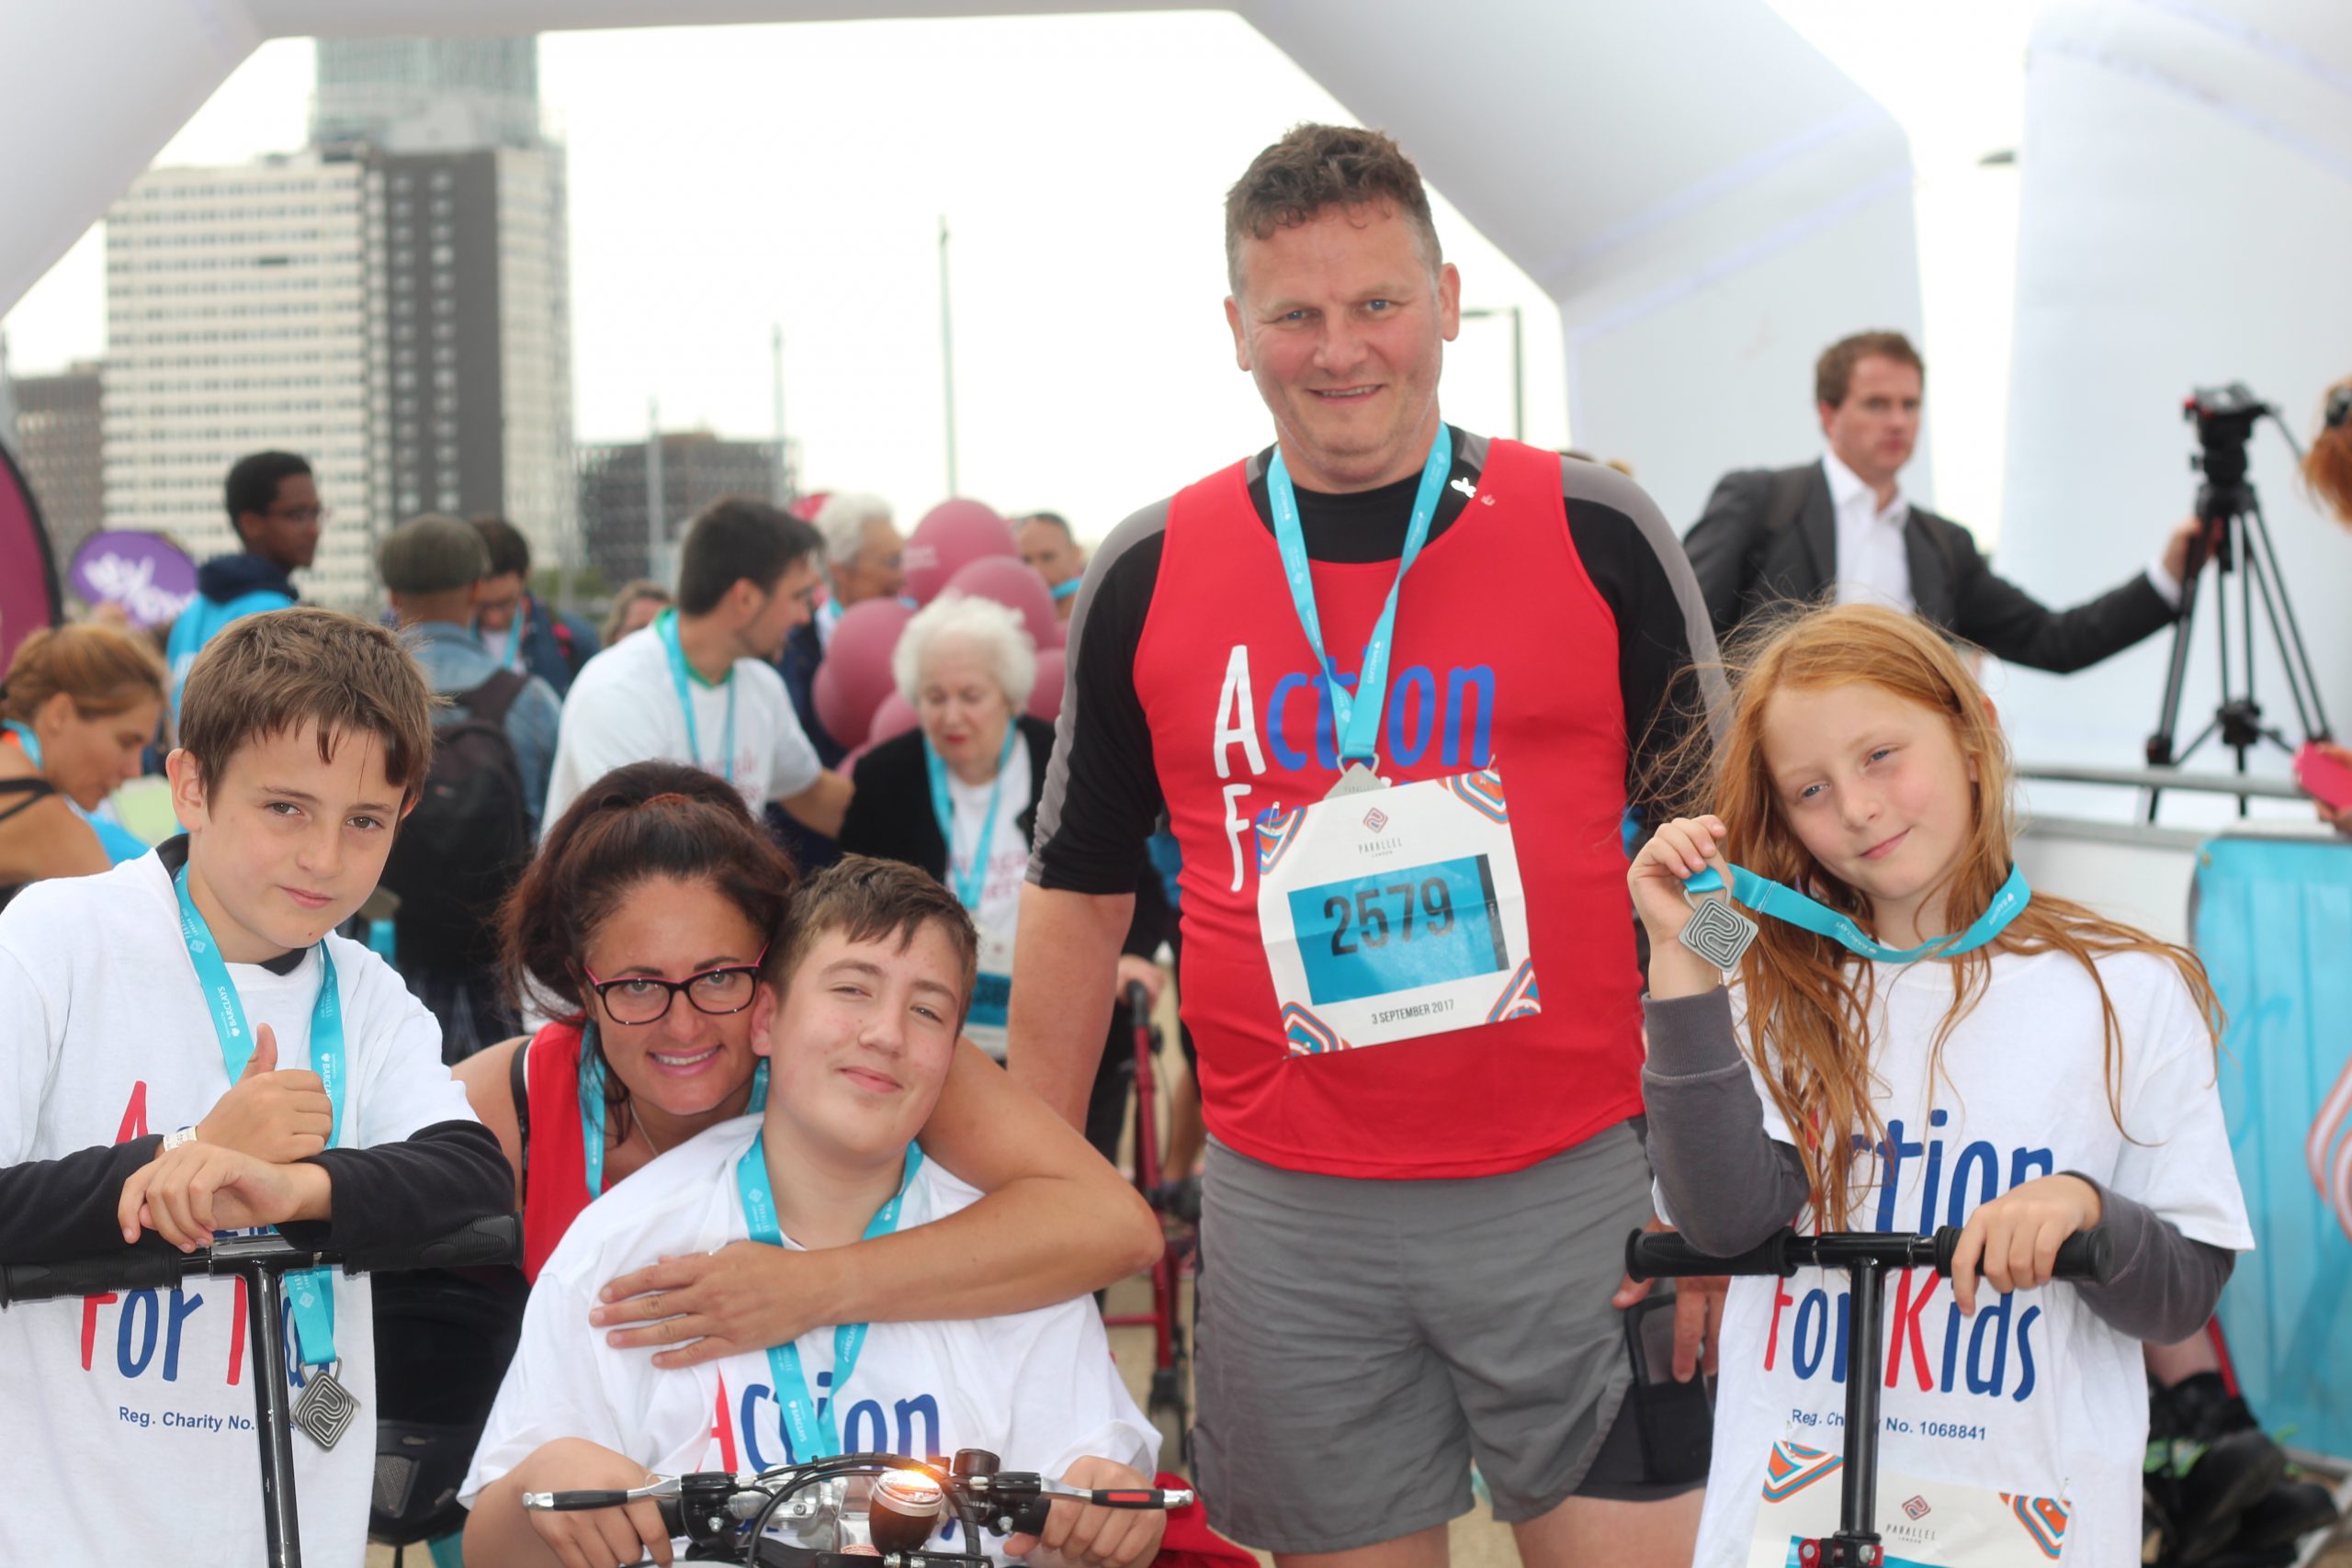 Group wearing AFK vests and medals at Parallel London finish line